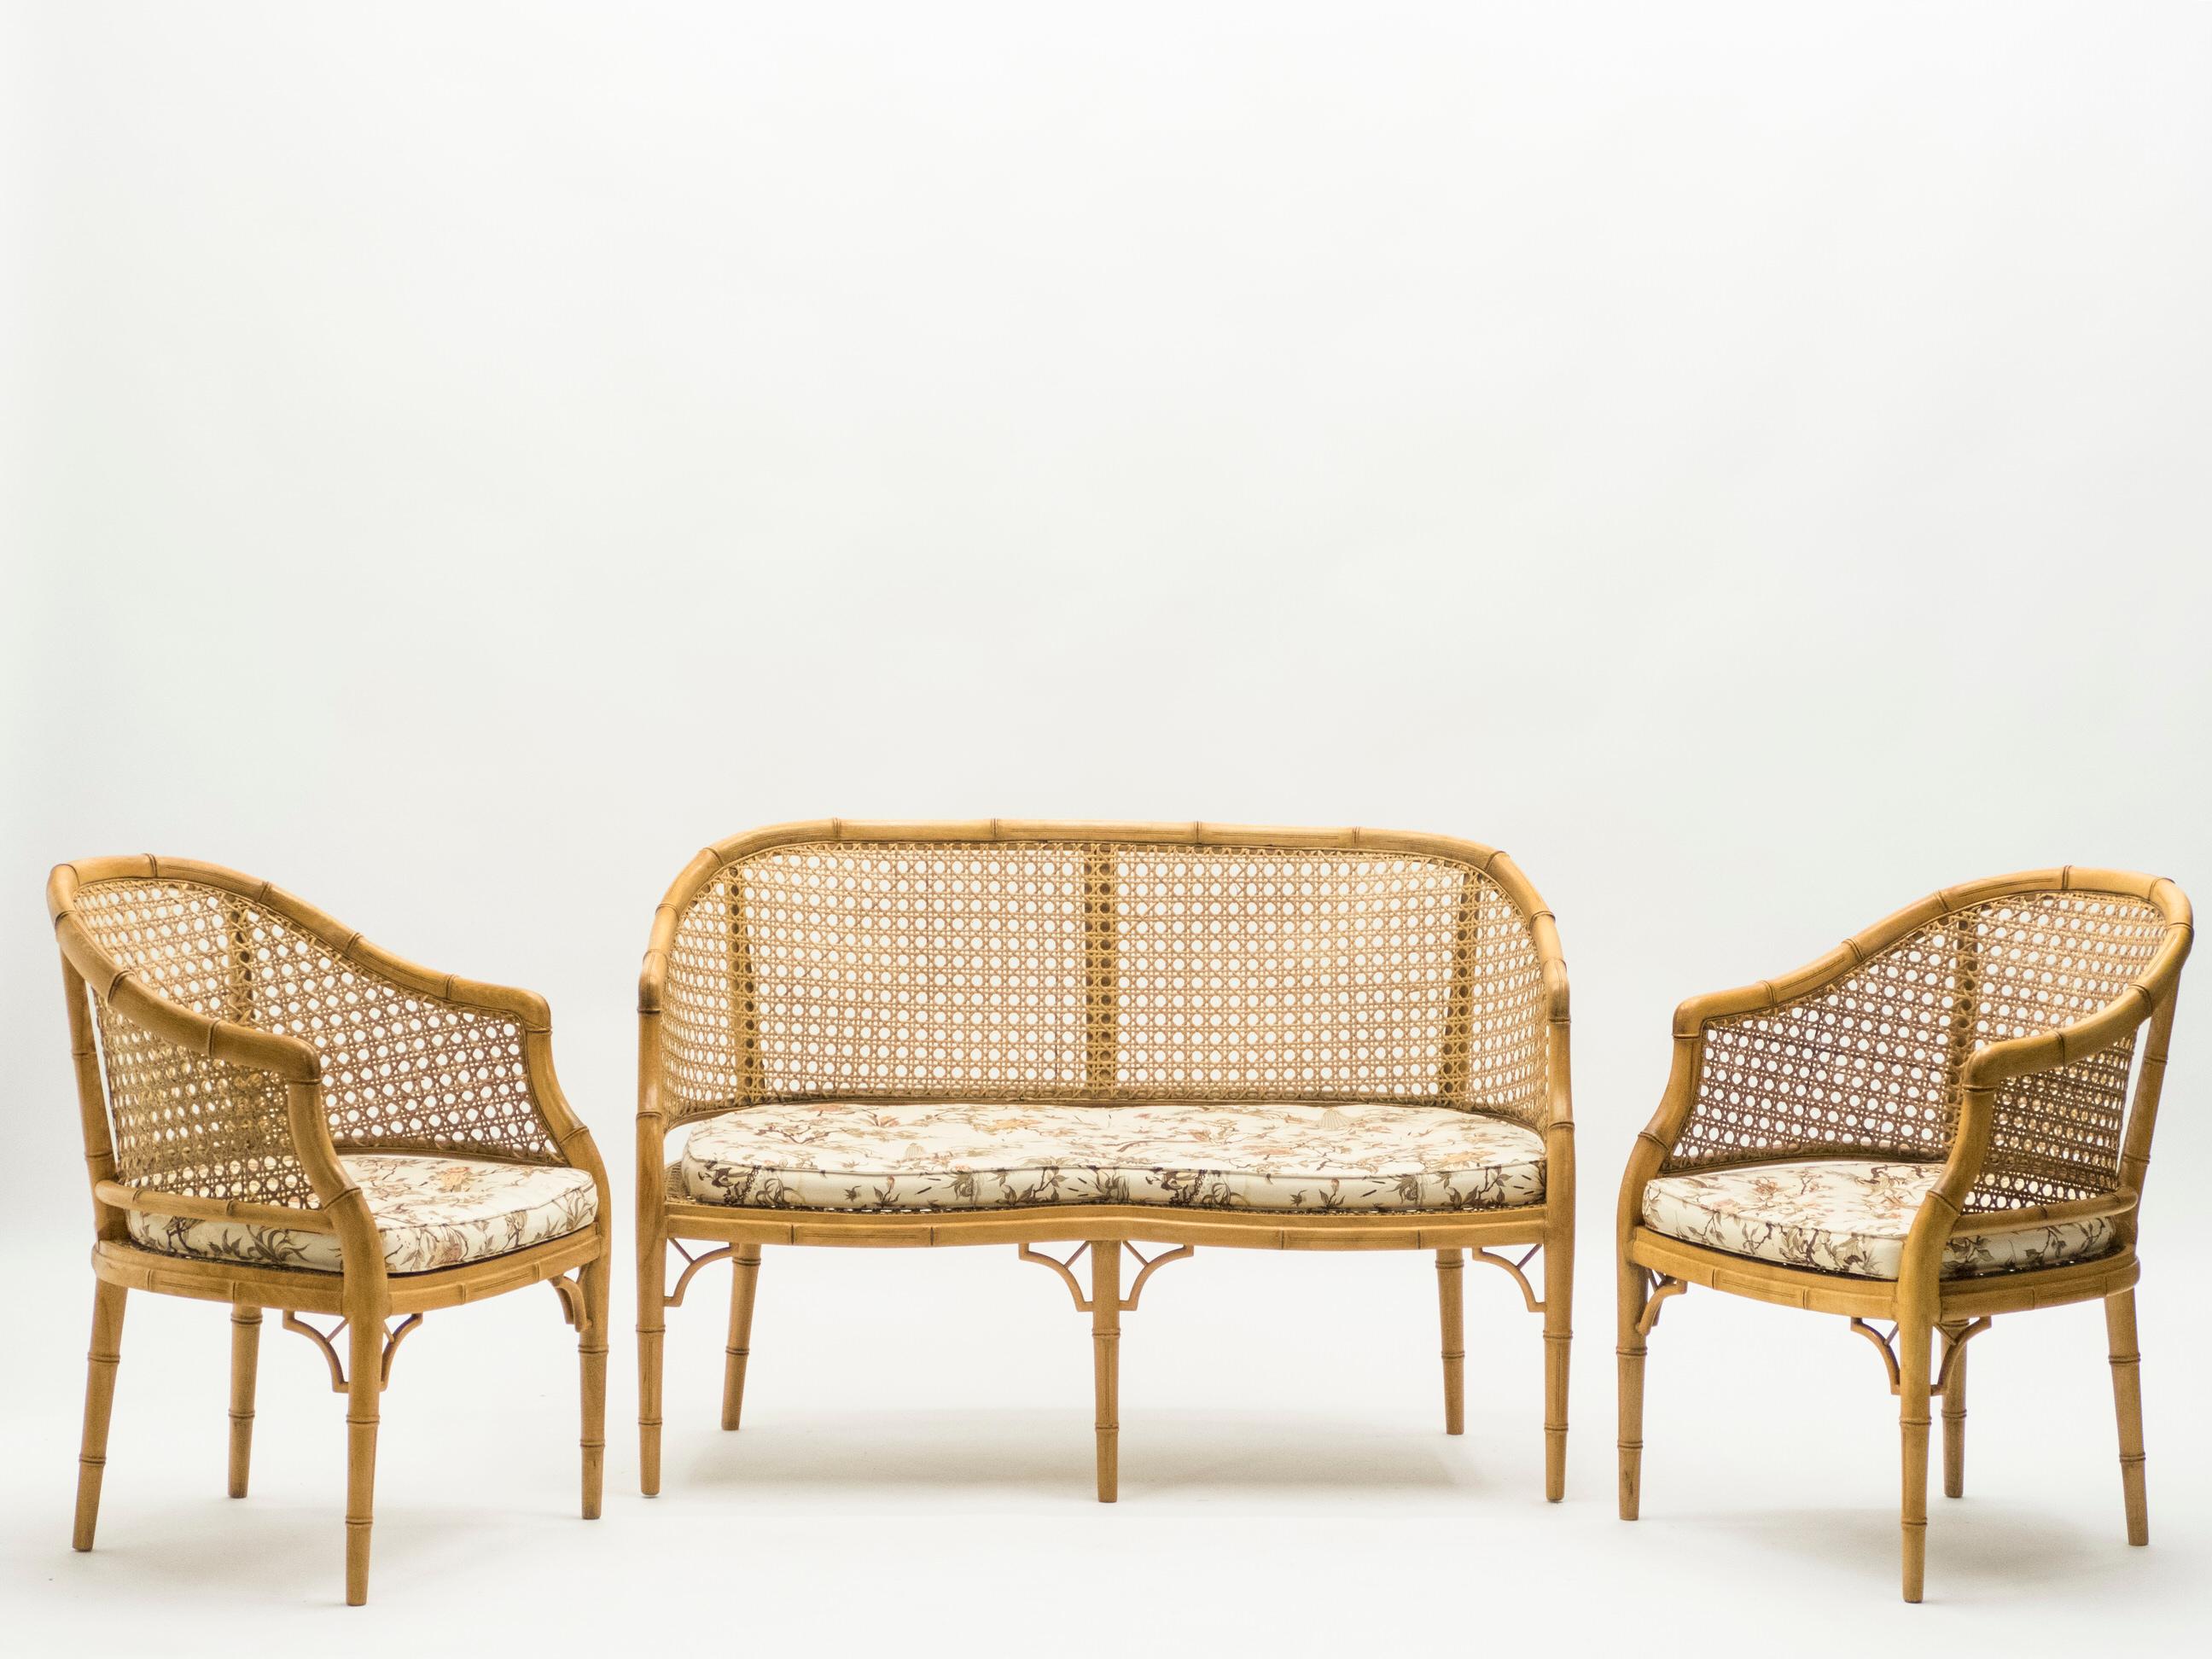 This bamboo sofa and two armchairs set from the Mid-Century Modern French Riviera period is bursting with nostalgia. A light golden bamboo structure, cane seat, and the original printed cushions would feel right at home in a stylish vacation house